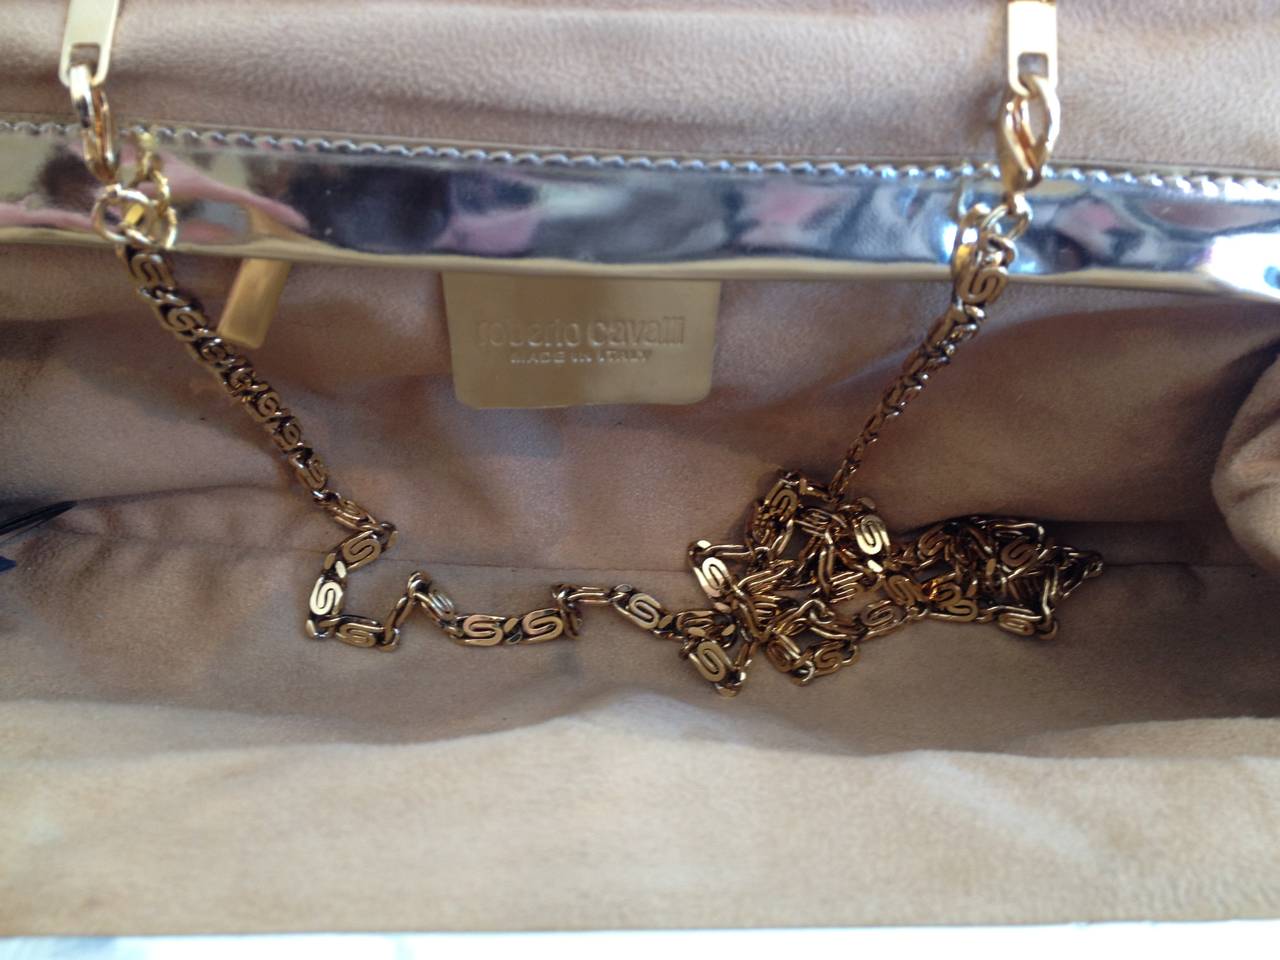 Women's Roberto Cavalli Black Clutch with Gold Snakes